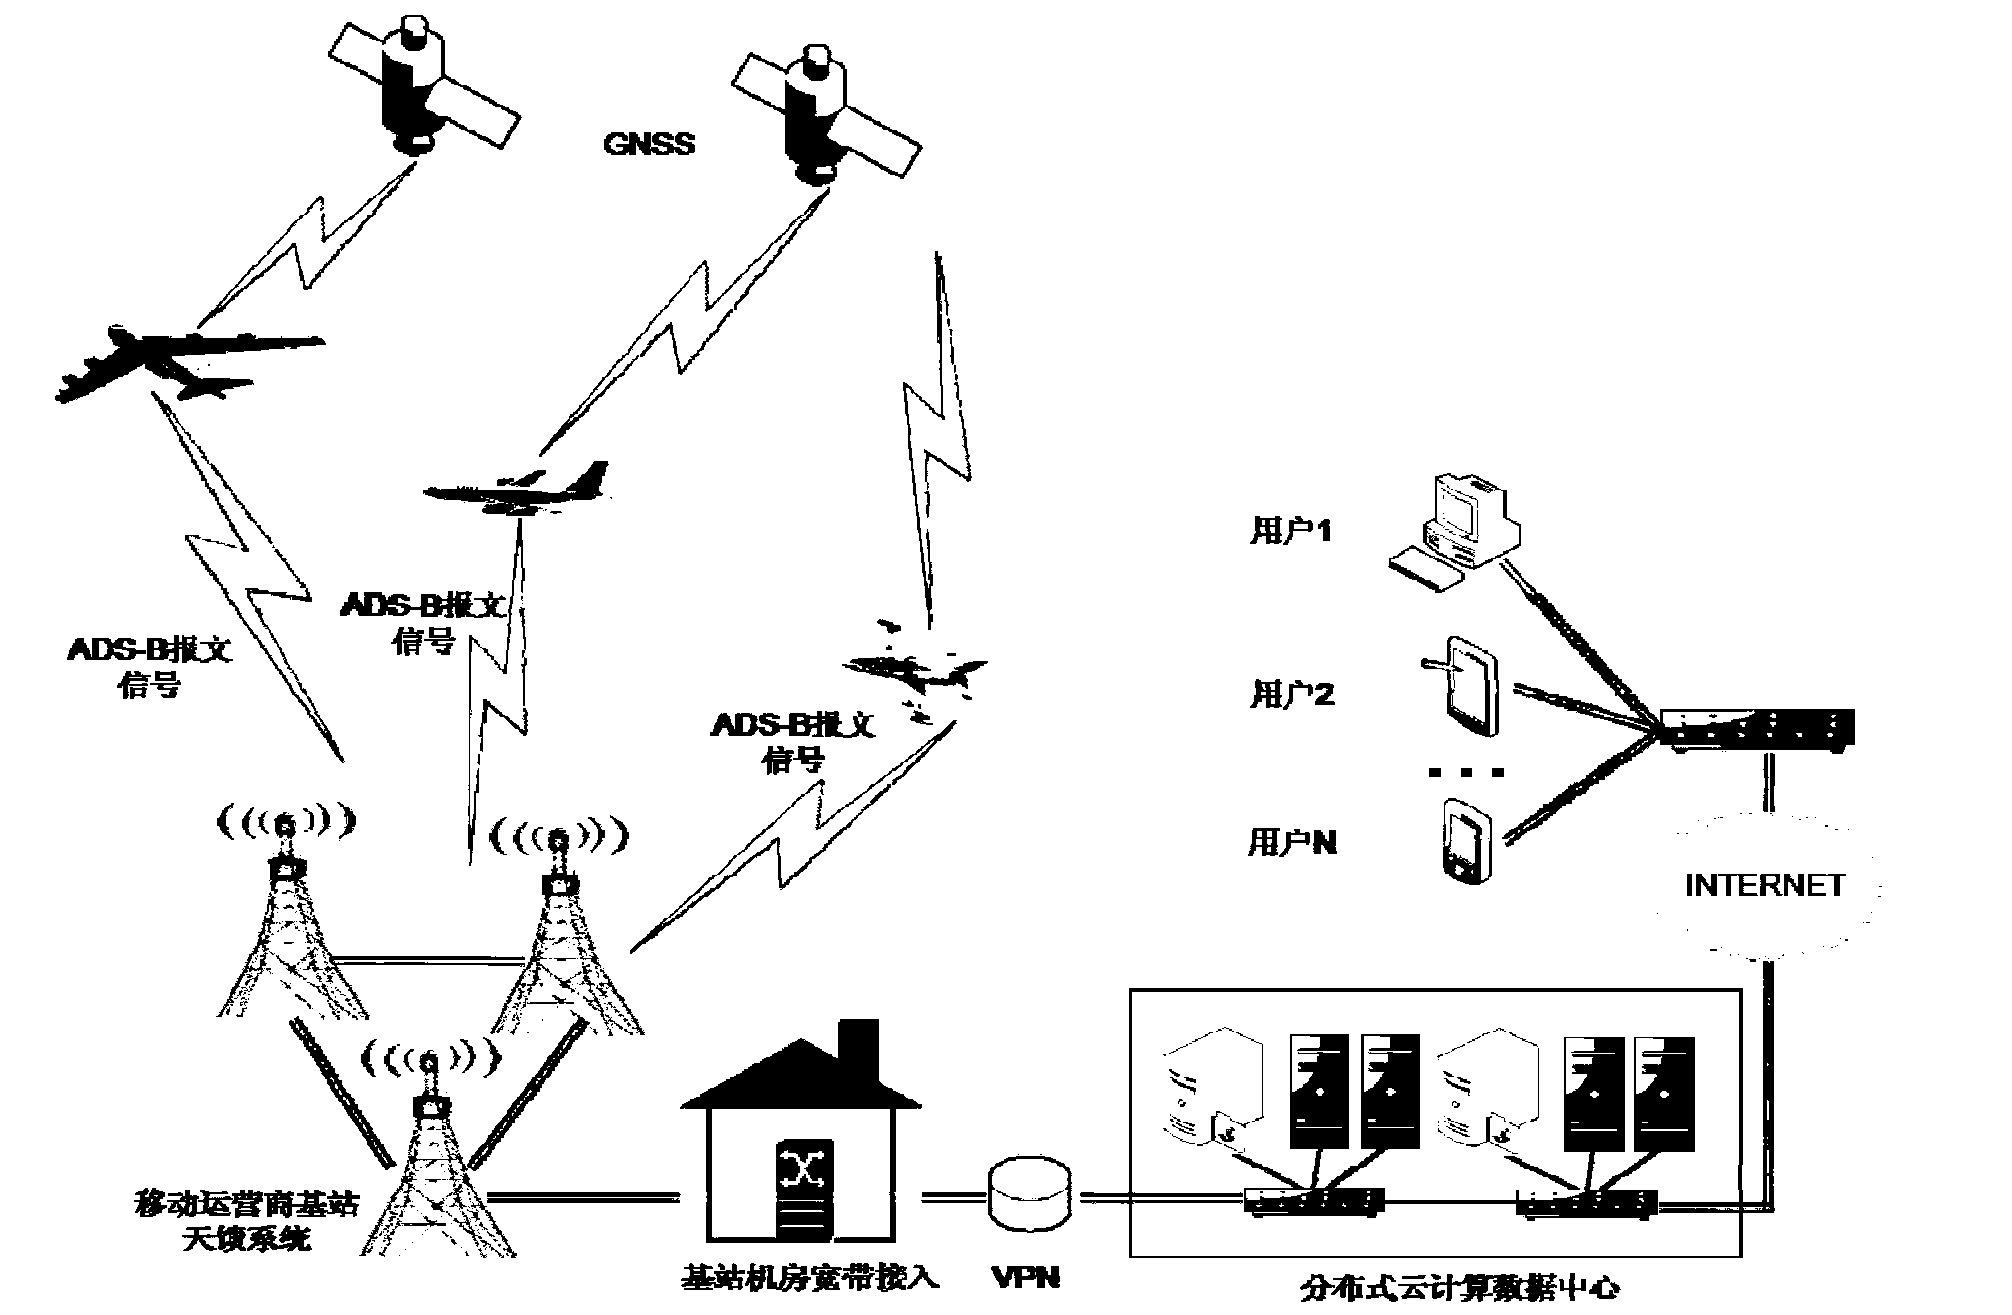 ADS-B (Automatic Dependent Surveillance-Broadcast) data collection method